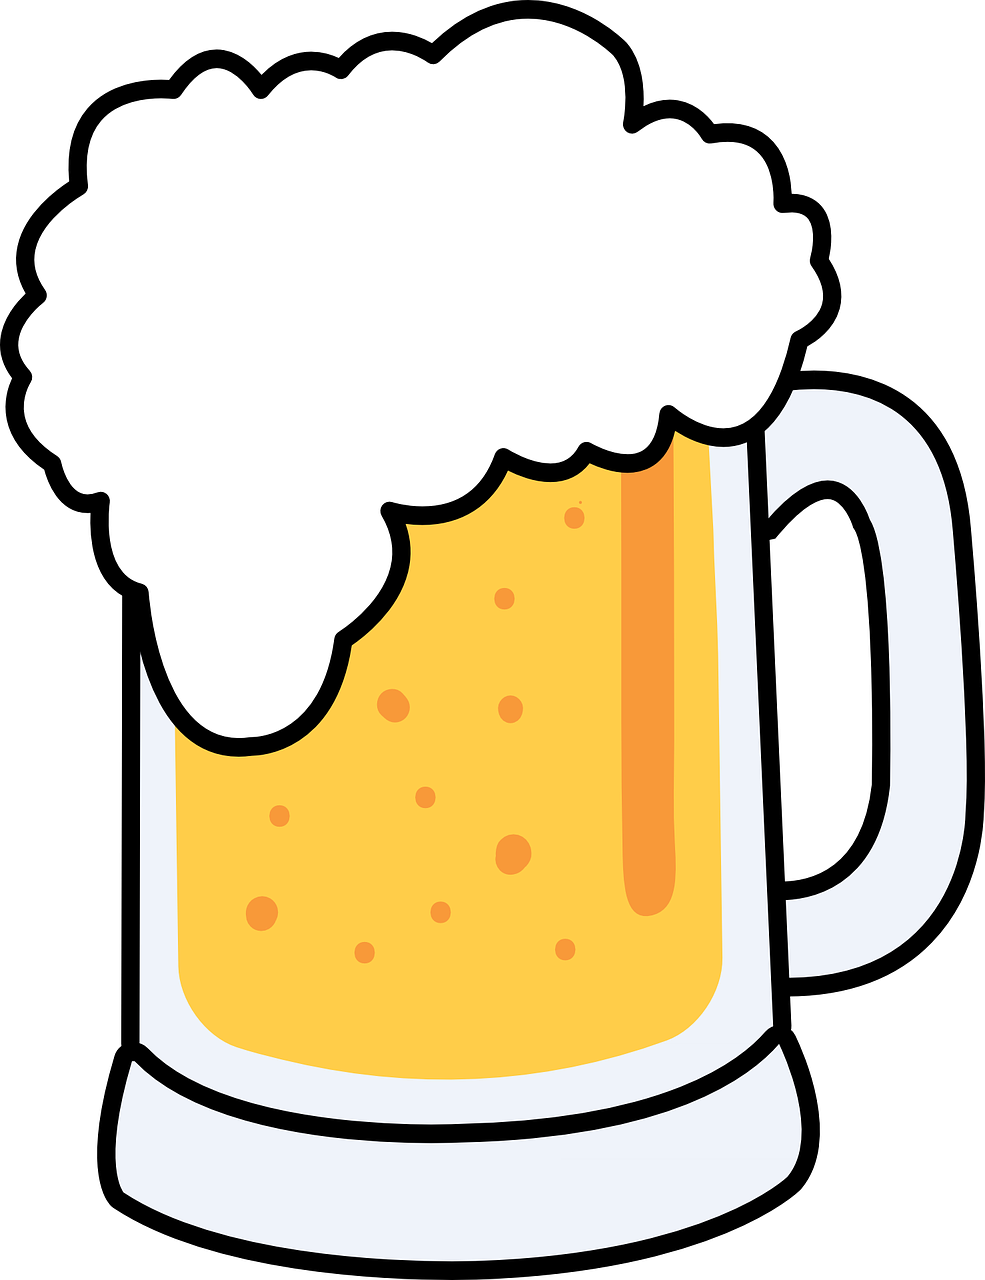 Pictures Of Full Beer Mugs Cheers Clipart Best